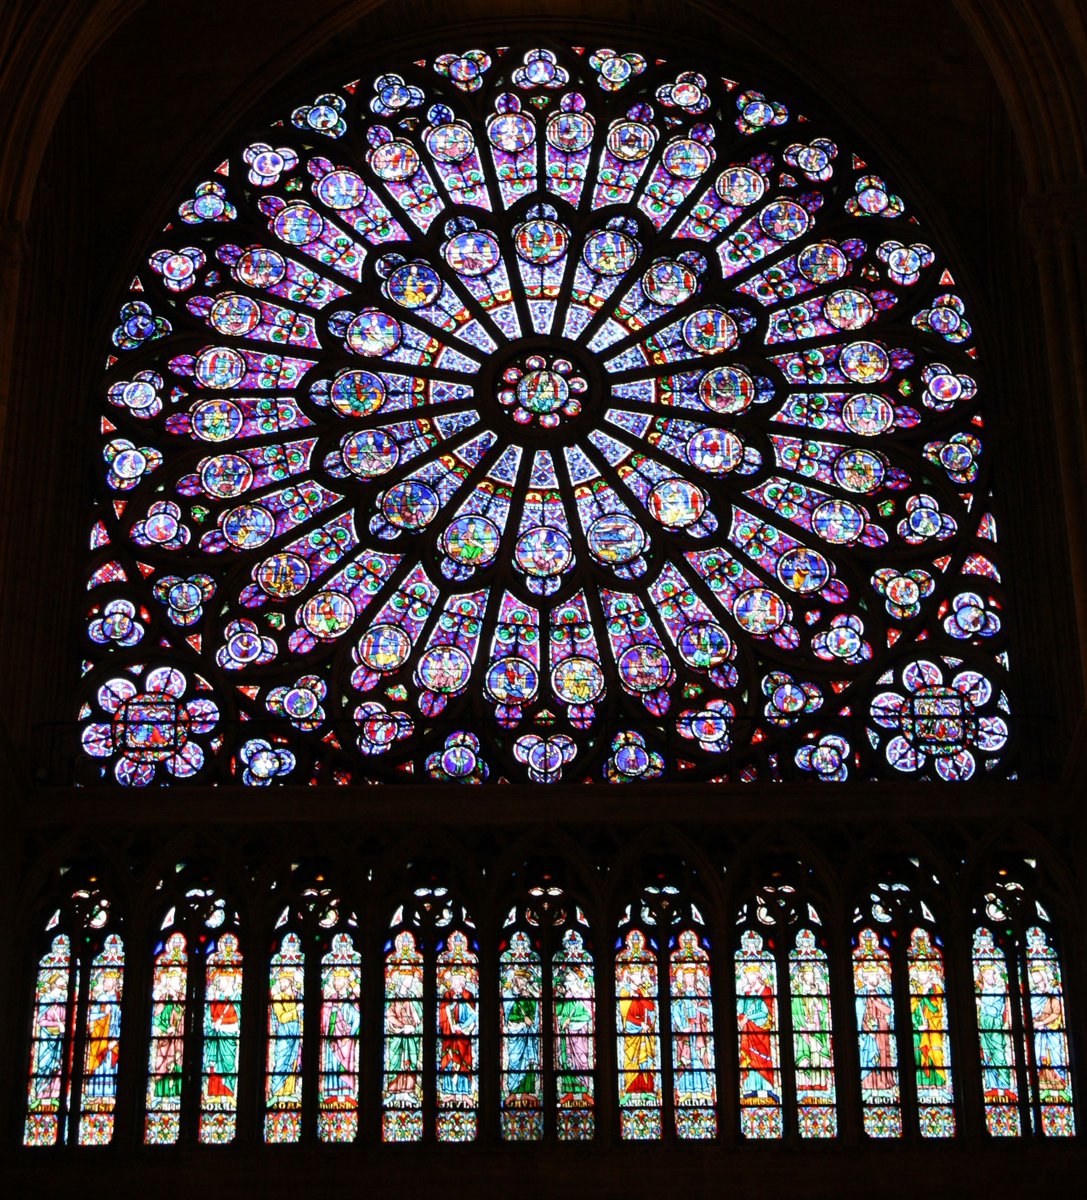 2) Reims Cathedral